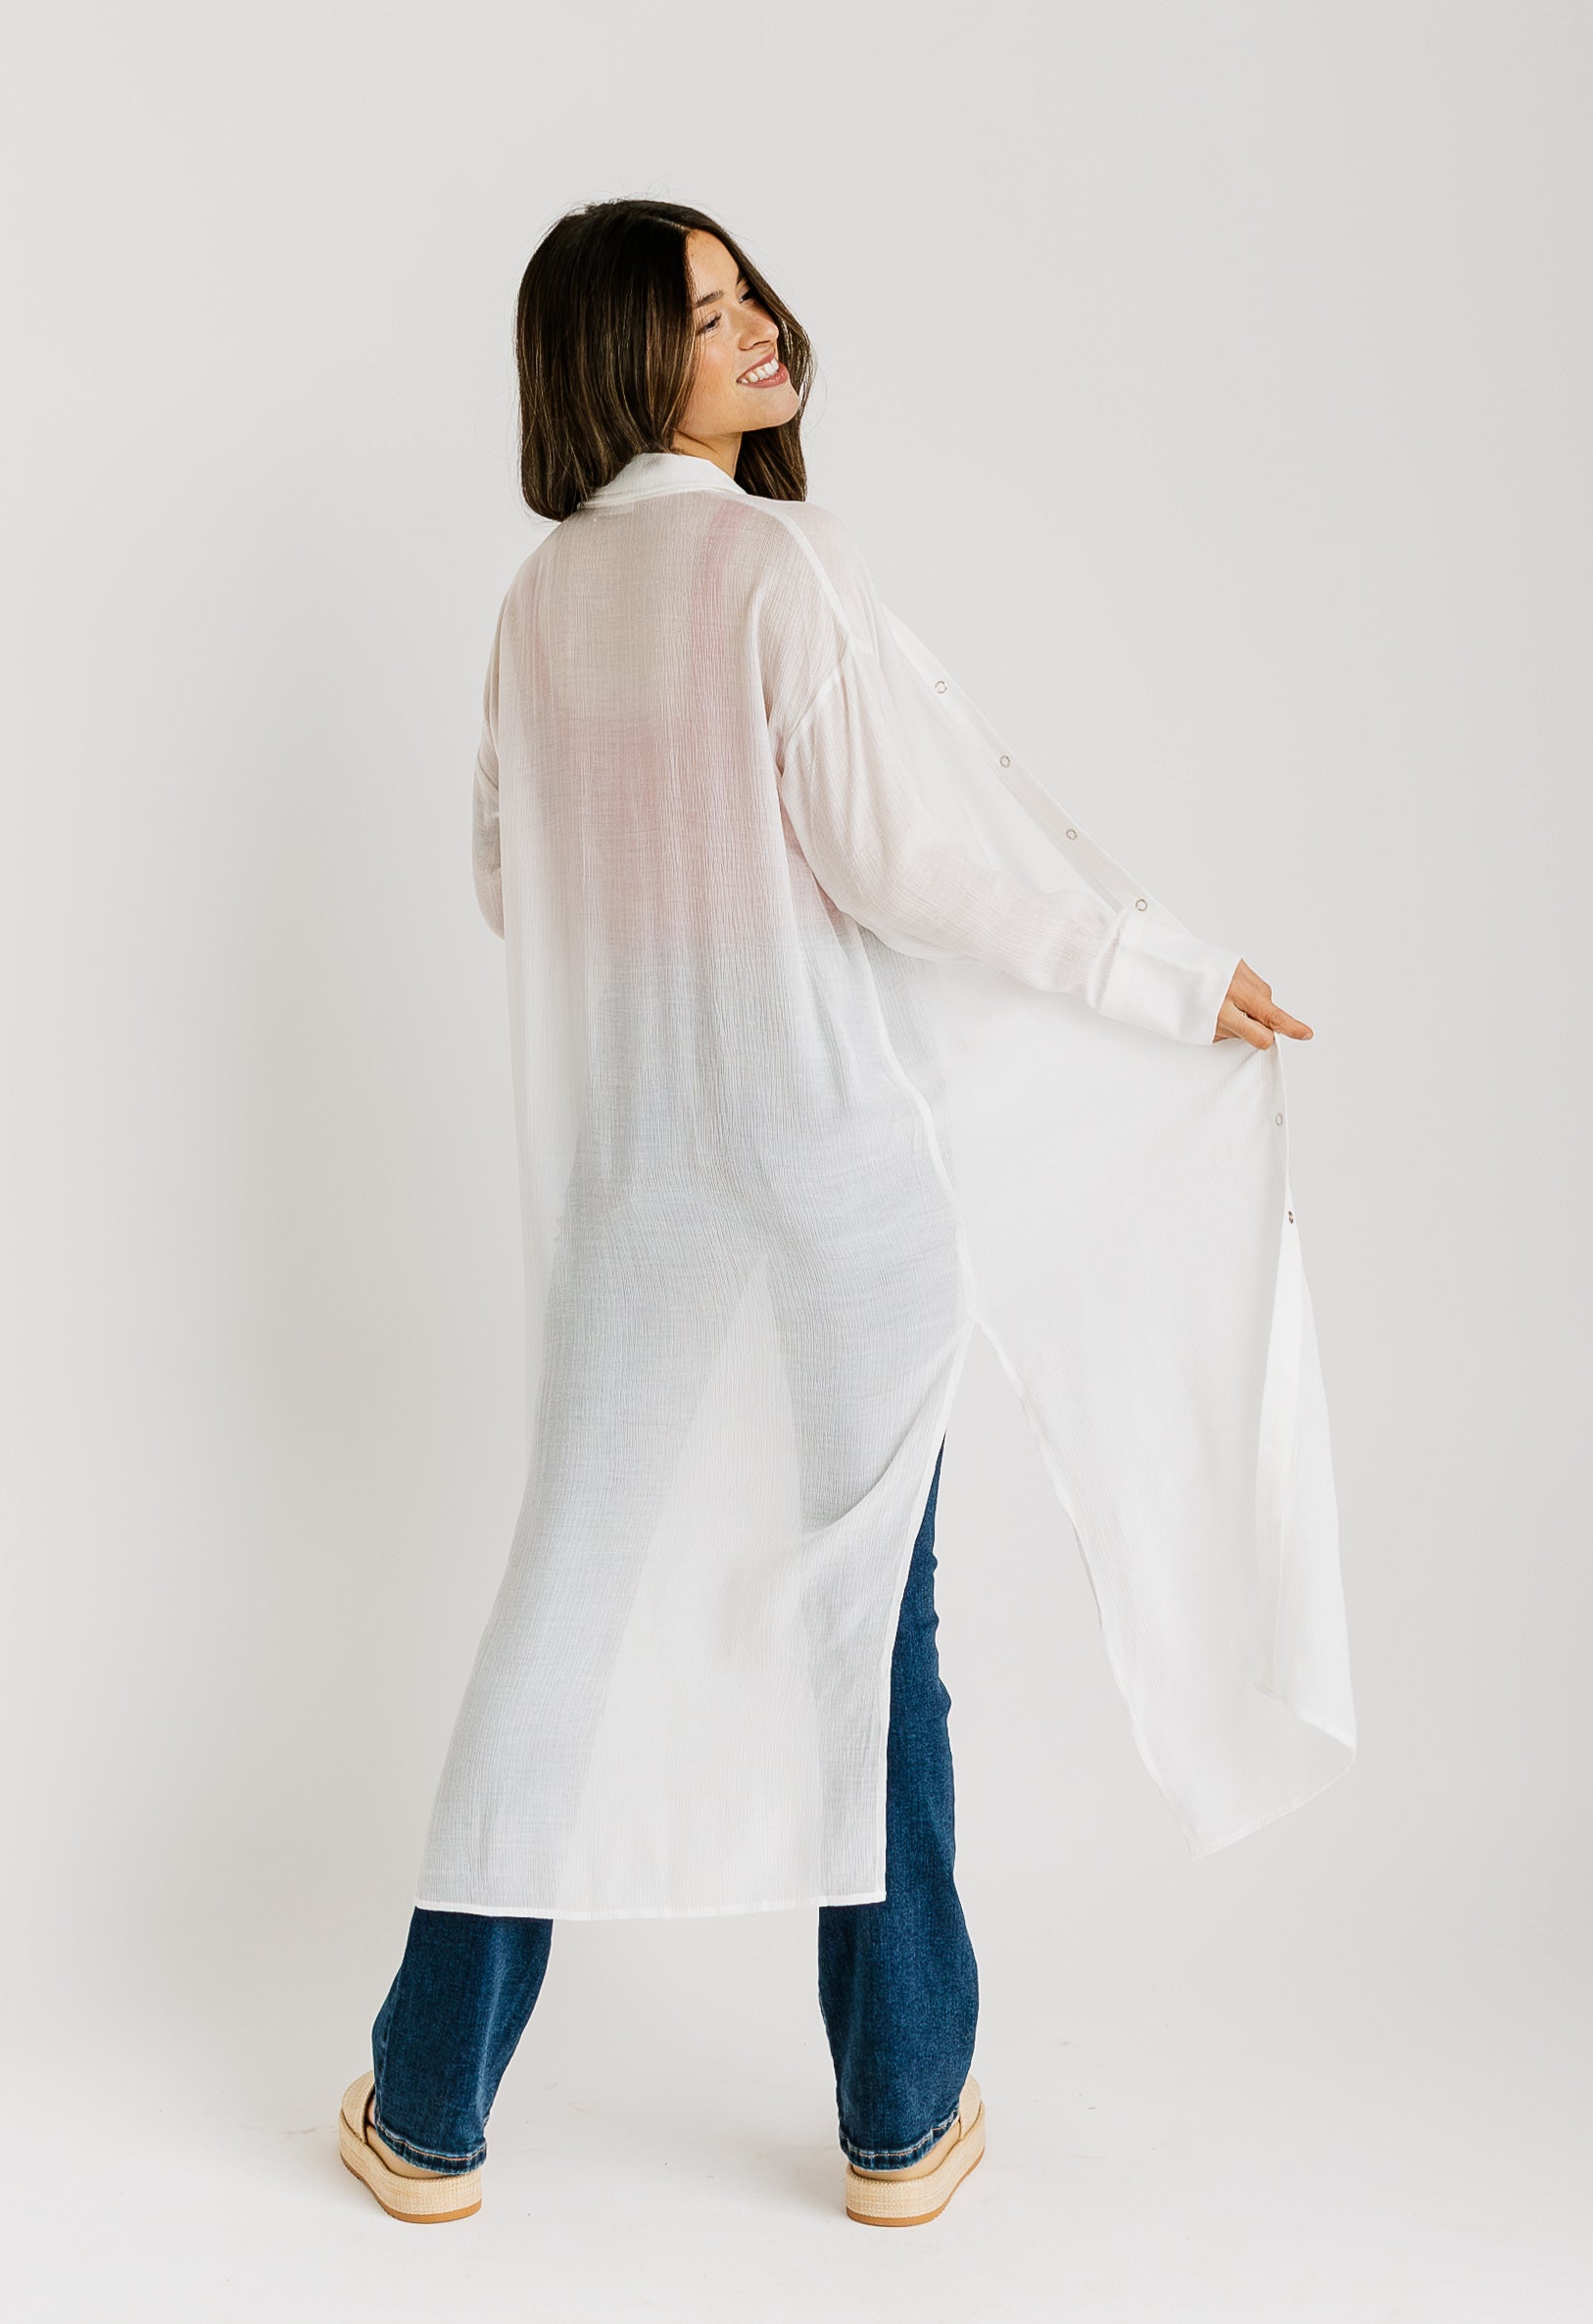 Paris Duster - OFF WHITE - willows clothing L/S Shirt